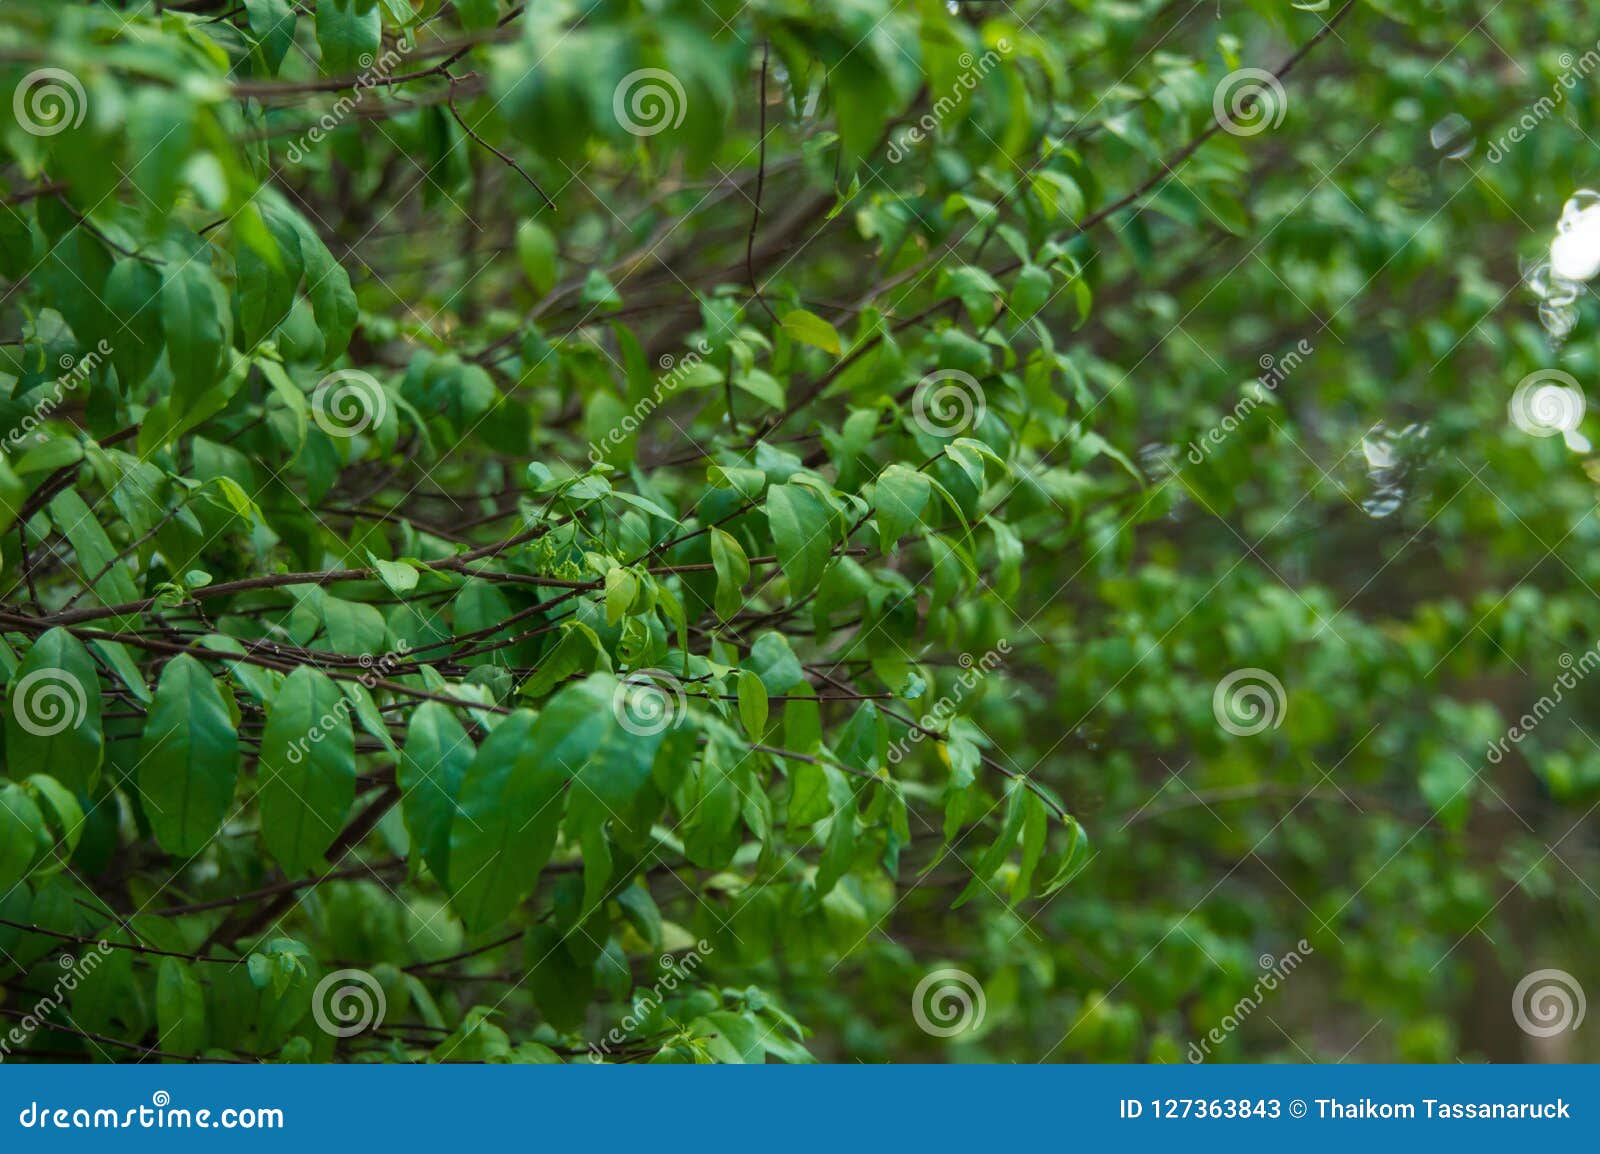 Small green leafs stock image. Image of nopeople, botany - 127363843